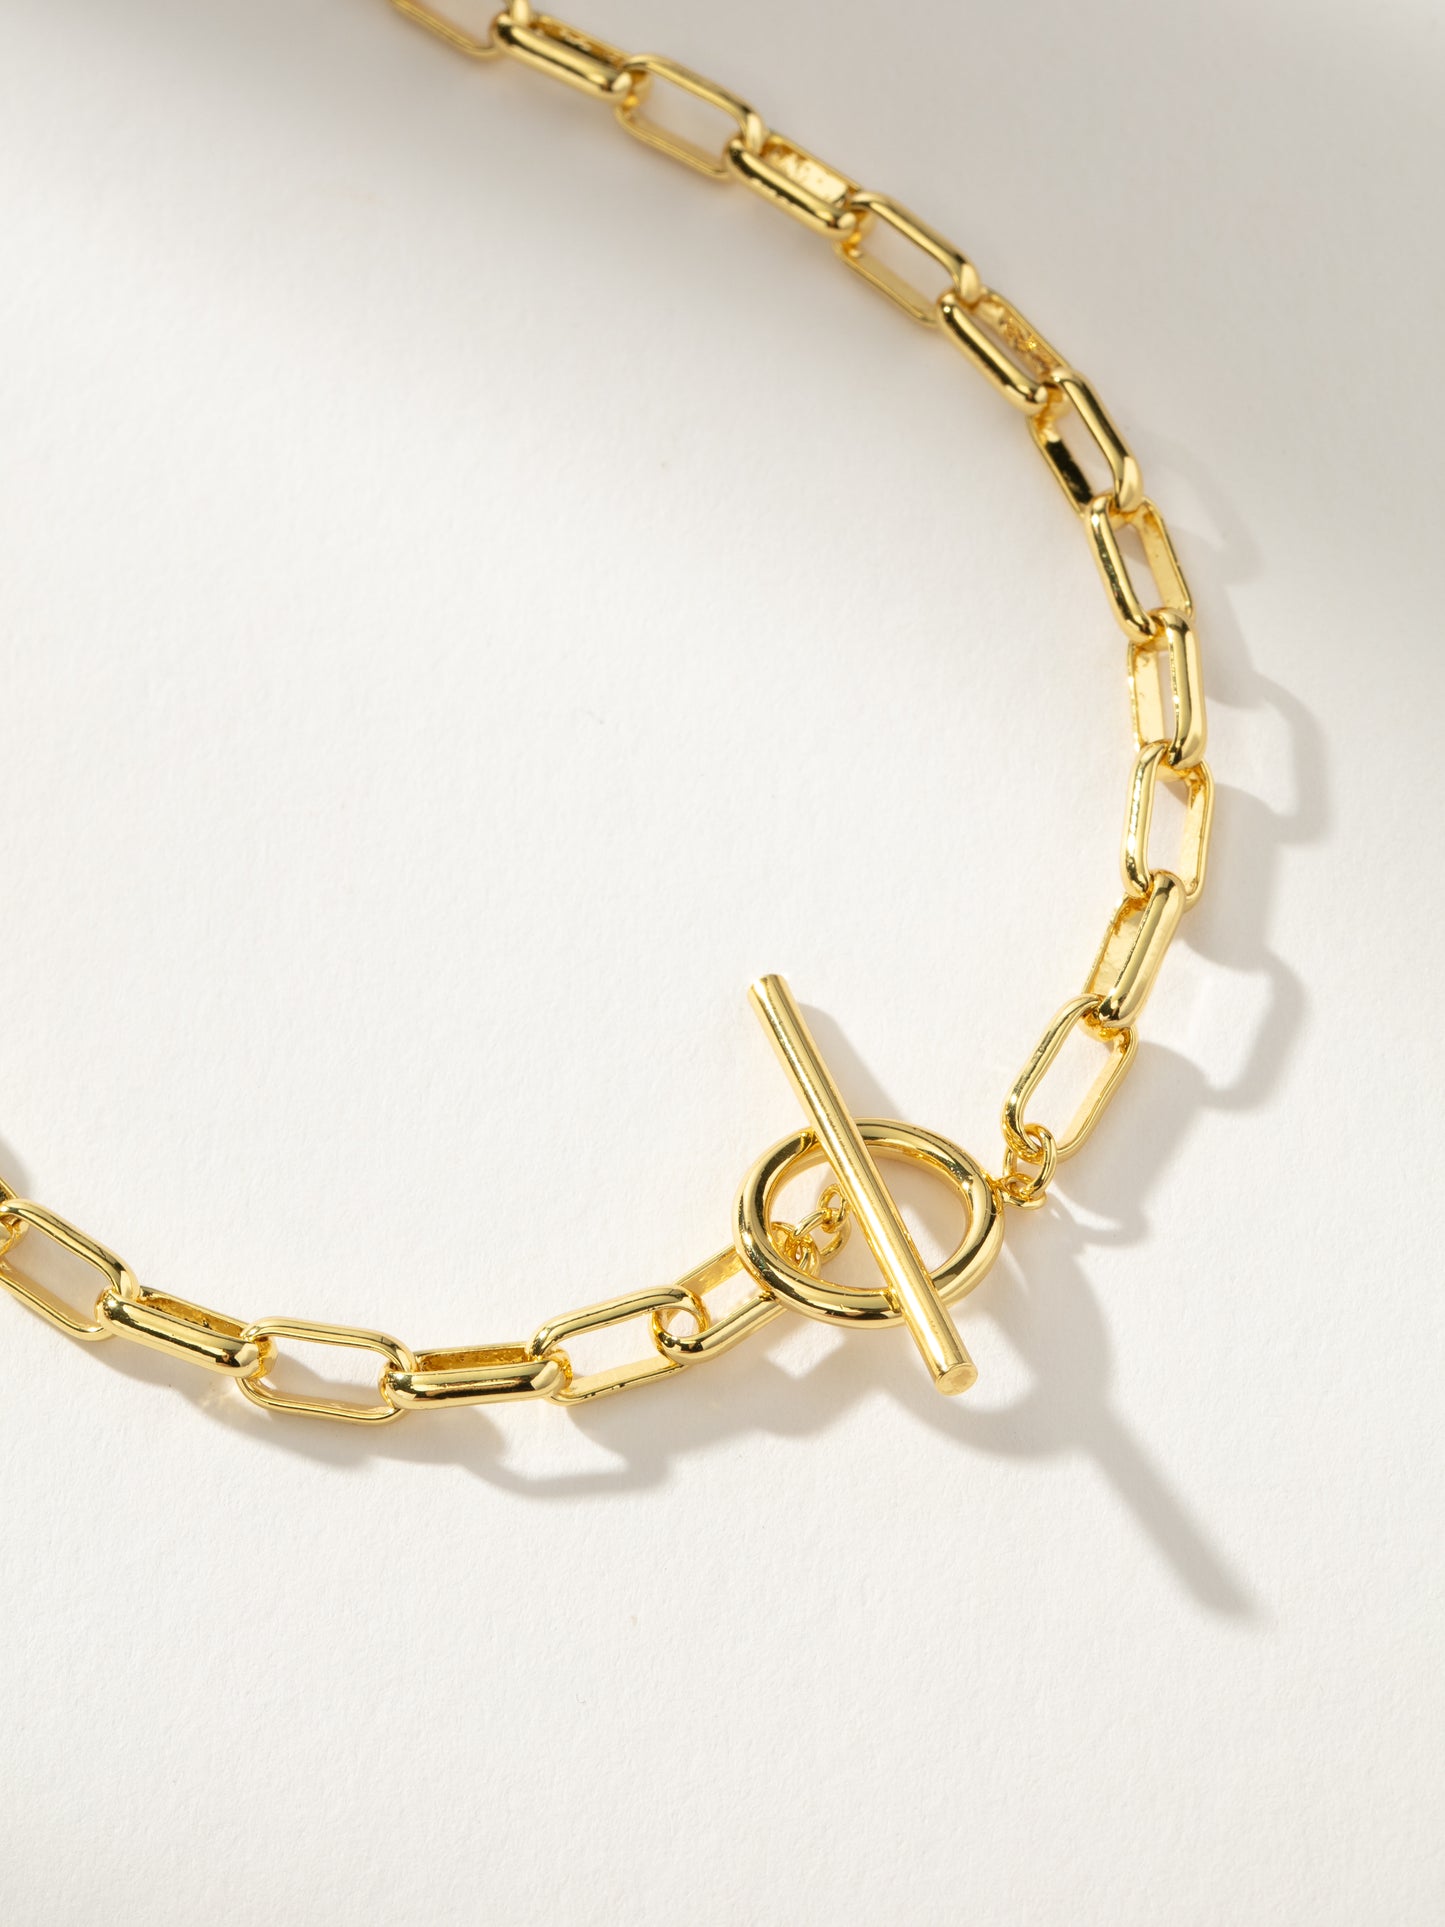 Staple Chain Necklace | Gold | Product Detail Image | Uncommon James